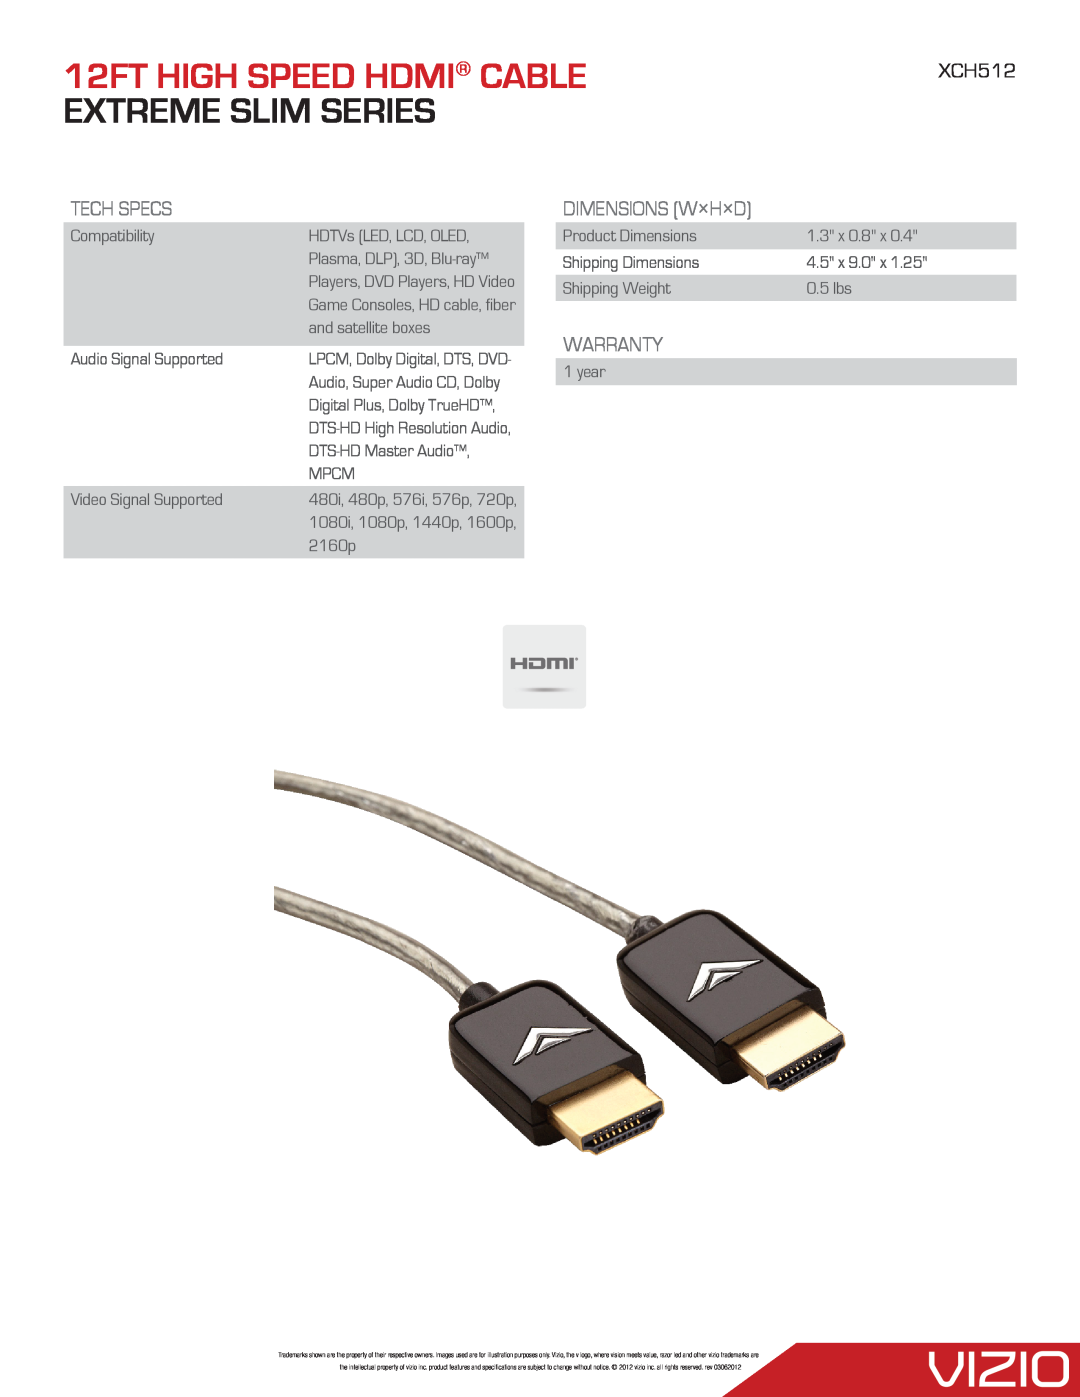 Vizio XCH512 specifications 12FT HIGH SPEED HDMI CABLE EXTREME SLIM SERIES, Tech Specs, Dimensions W×H×D, Warranty 